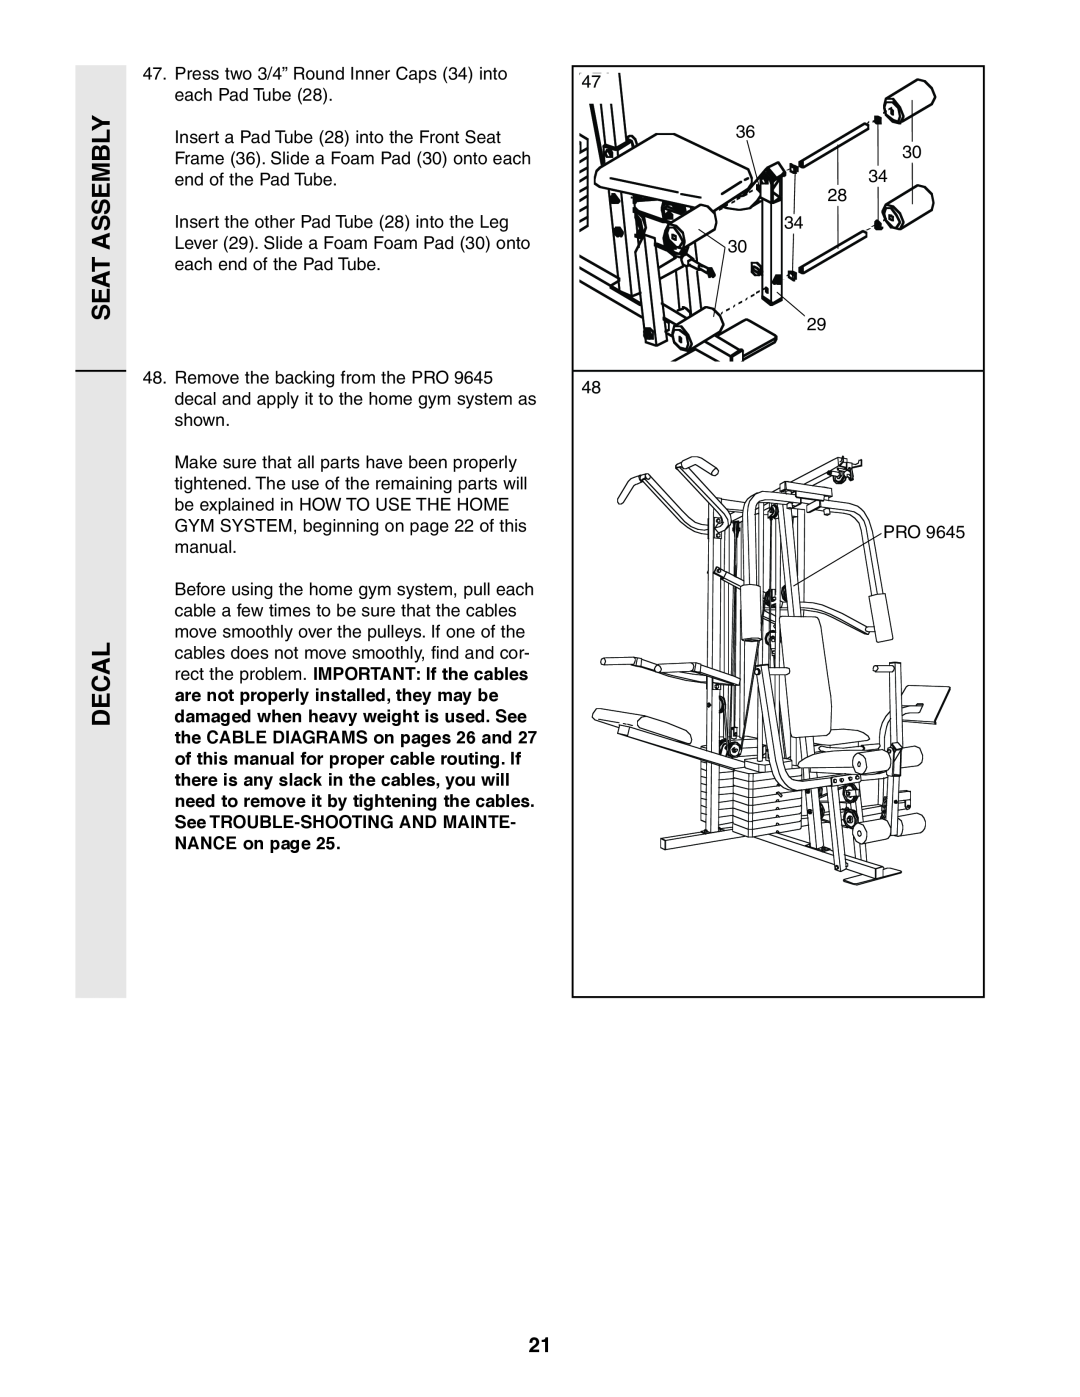 Weider 831.159380 user manual rect the problem. IMPORTANT If the cables, are not properly installed, they may be, Assembly 